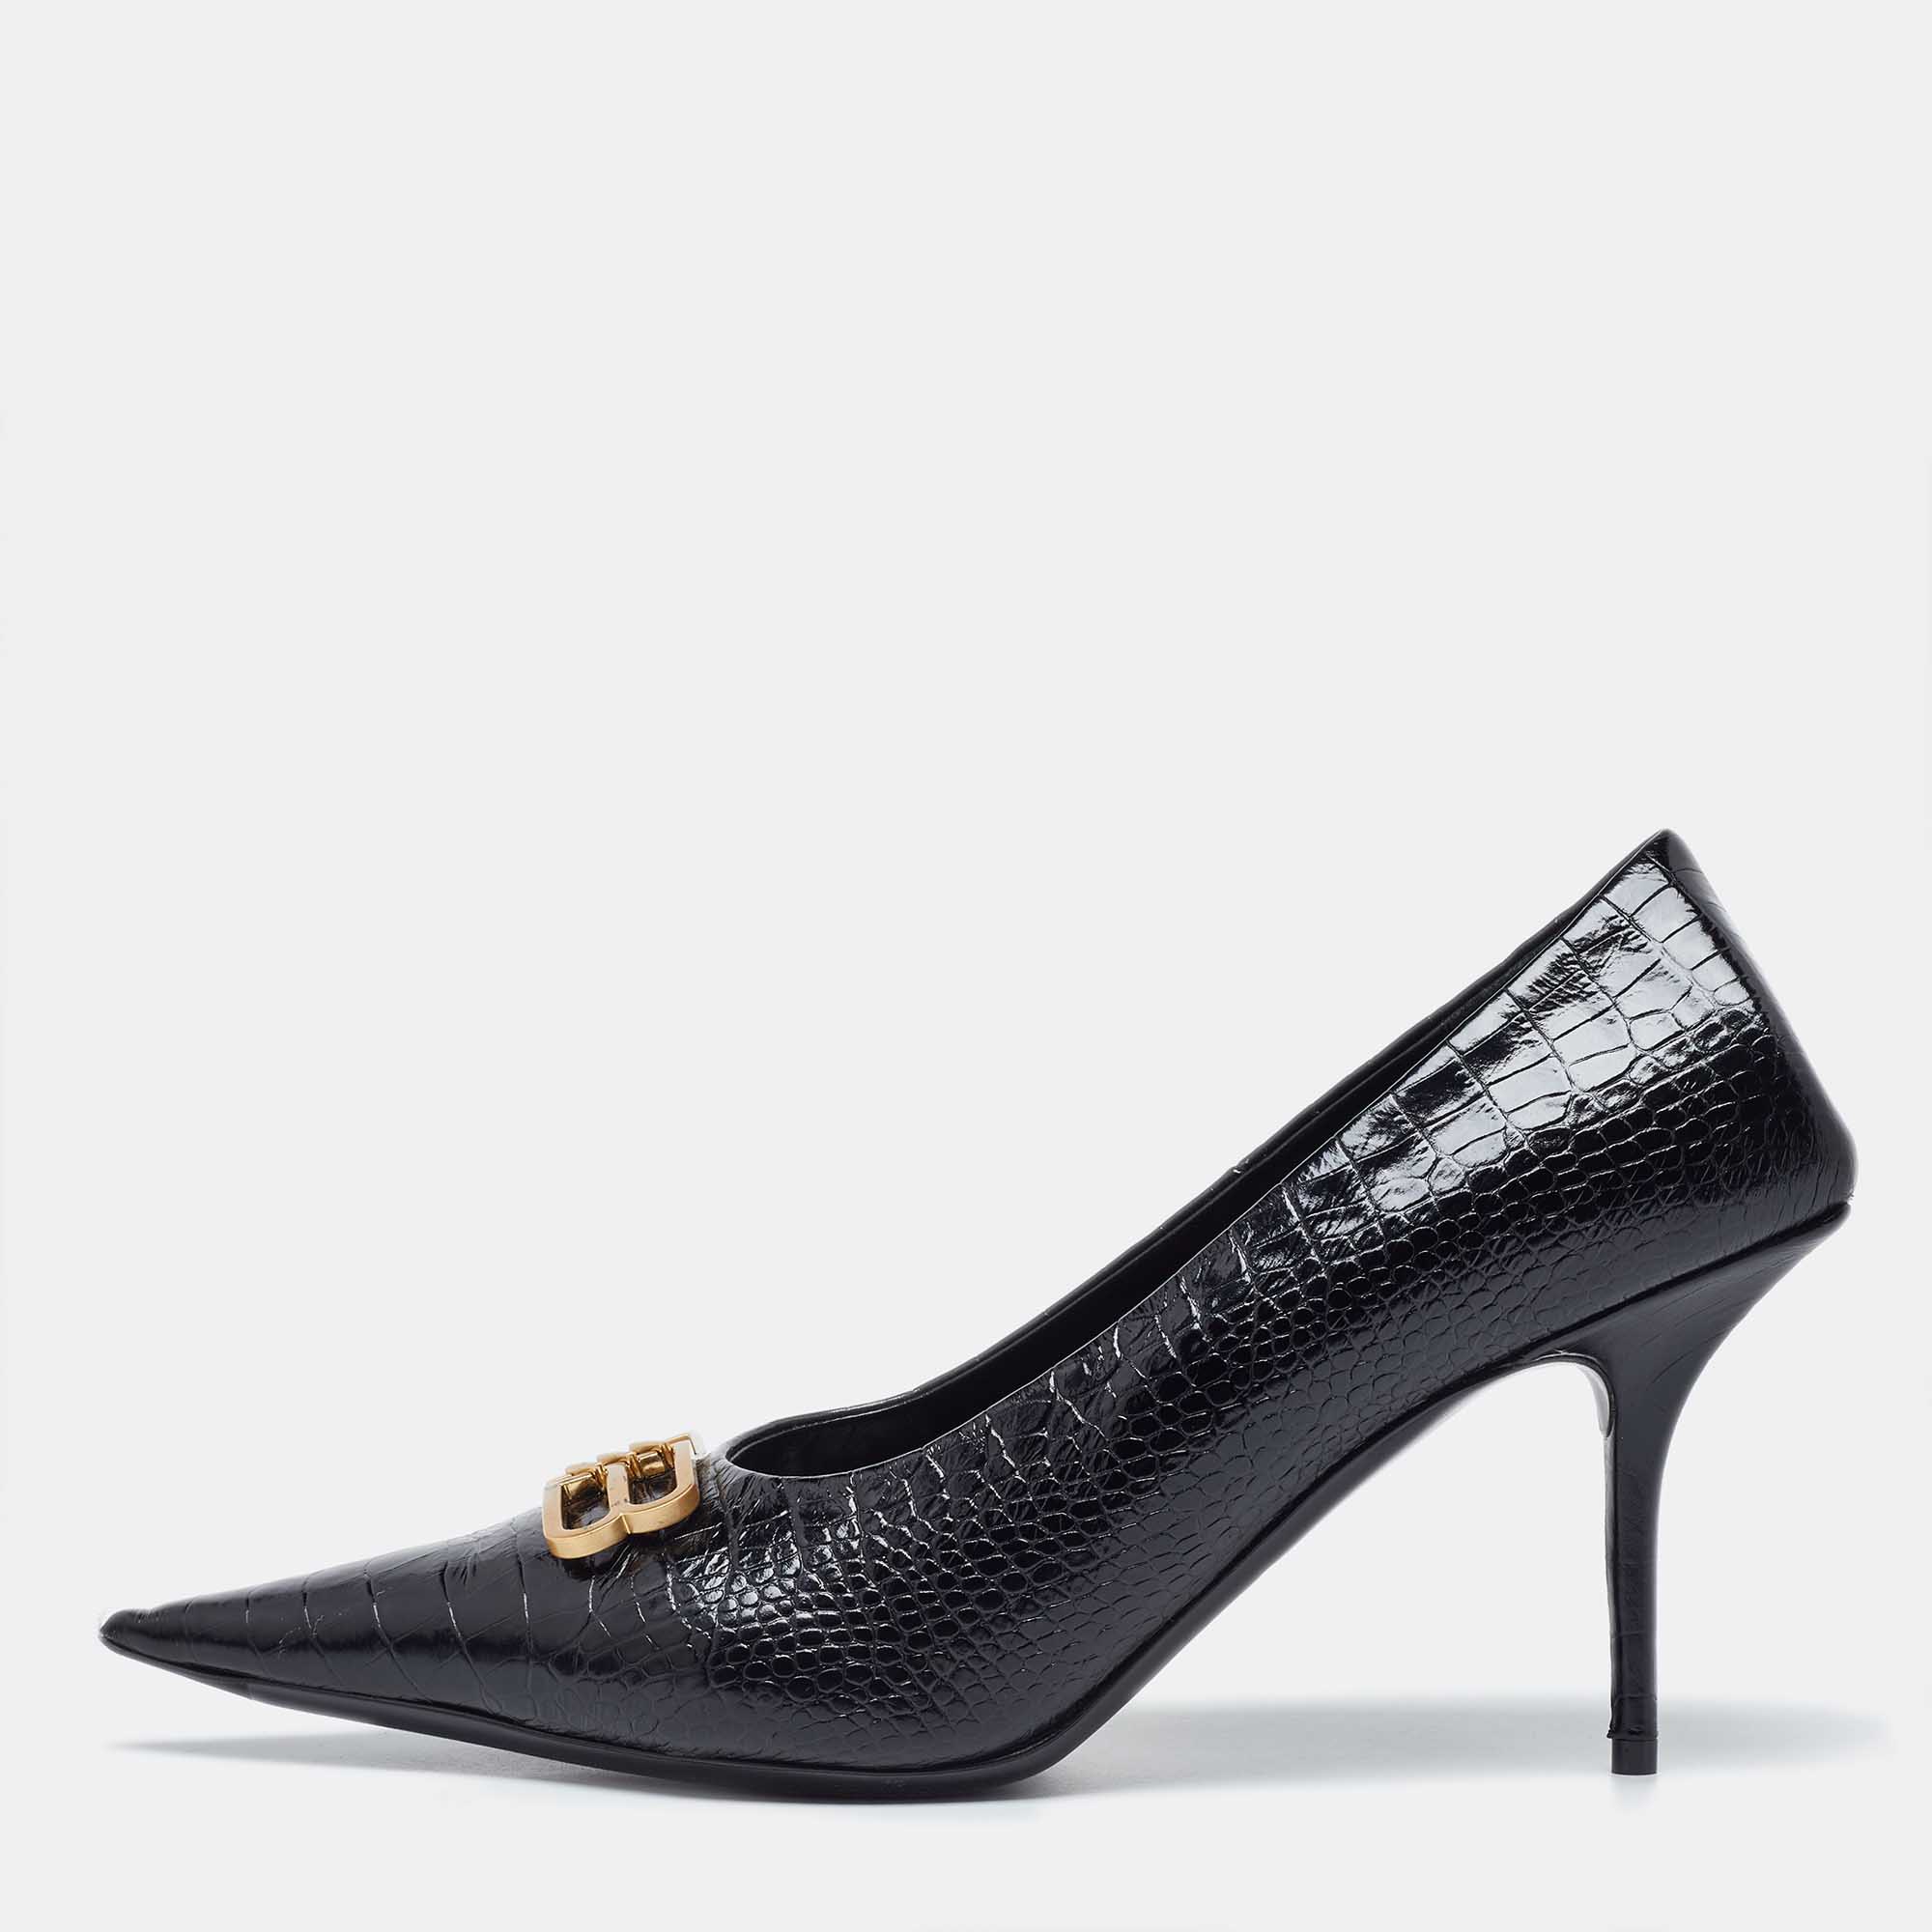 Balenciaga black croc embossed leather knife pointed toe pumps size 40